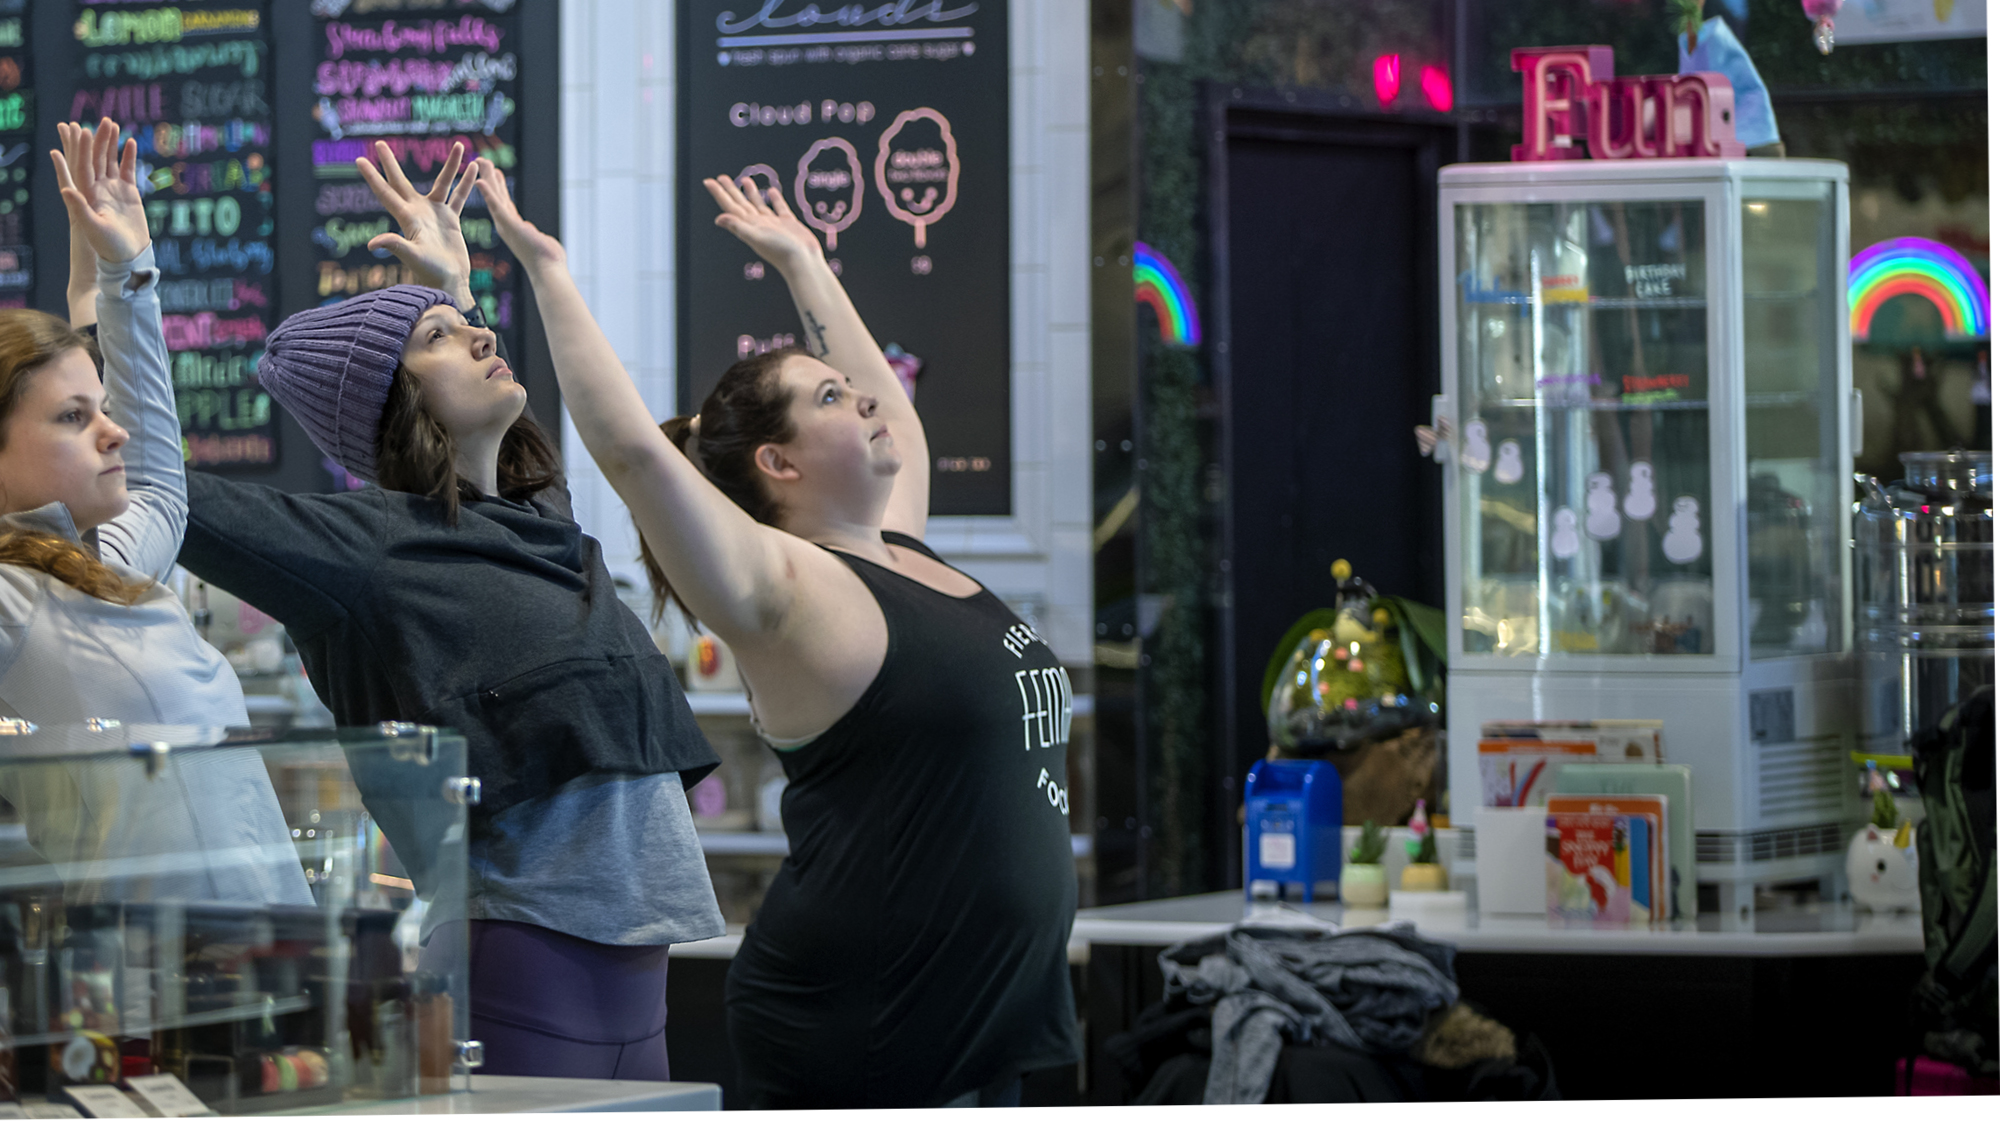 Minnesota-made offerings are the main draw at the bustling Keg and Case Market, which also hosts activities that range from early morning yoga, above, to trivia nights.